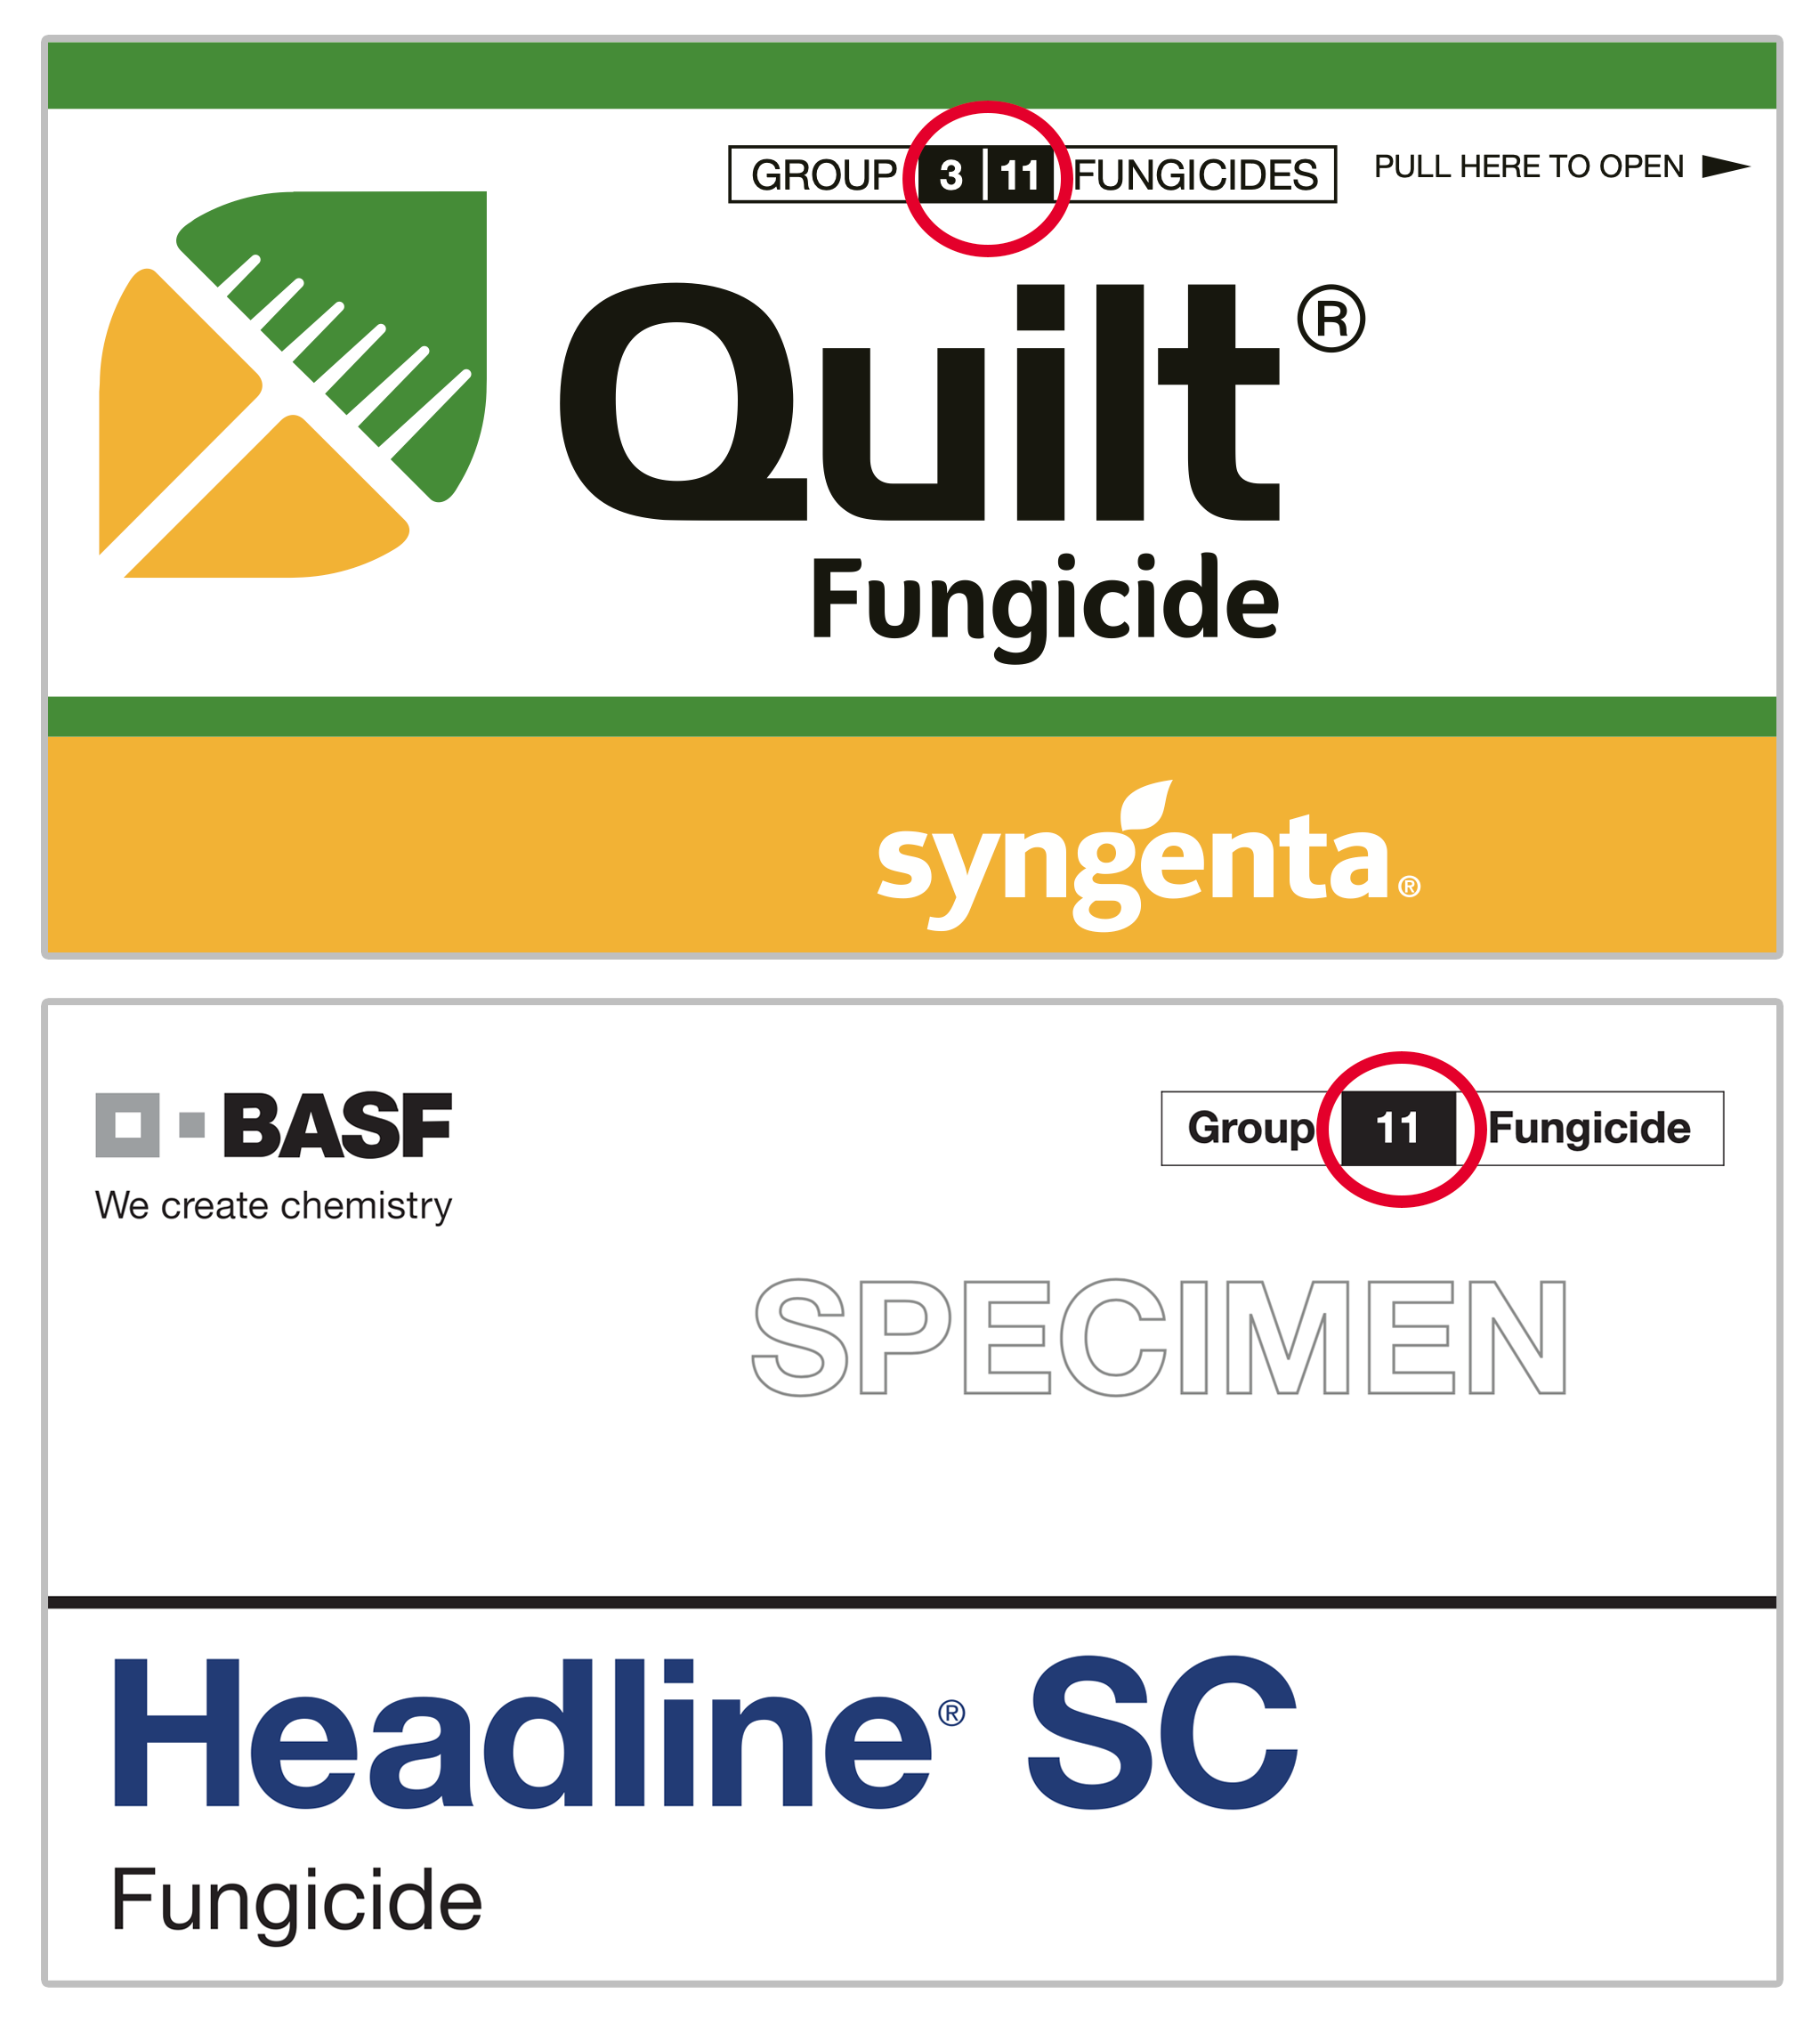 Two pictures of fungicide labels showing the FRAC code signifying mode of action.